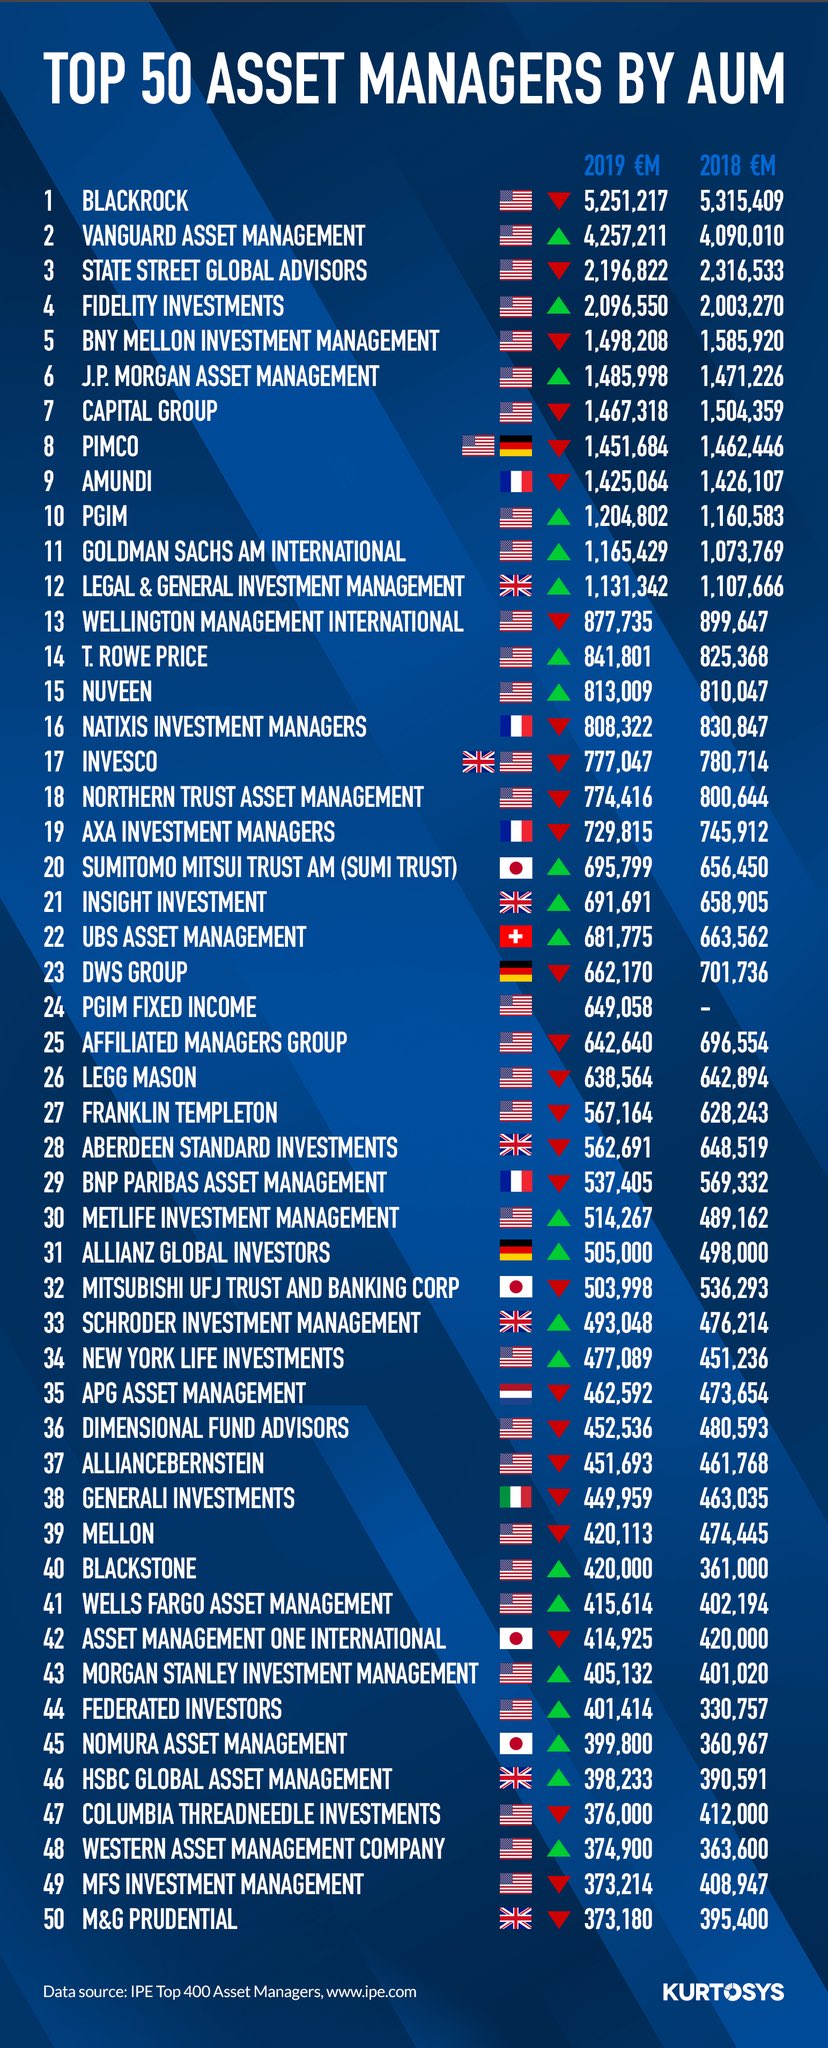 Intervenere tom flydende tnkttc on Twitter: "Top 50 Asset Managers By AUM. The company at the 50th  rank has almost 10 times AUM of all the Turkish Asset Management companies  combined https://t.co/5X8NASPZev" / Twitter